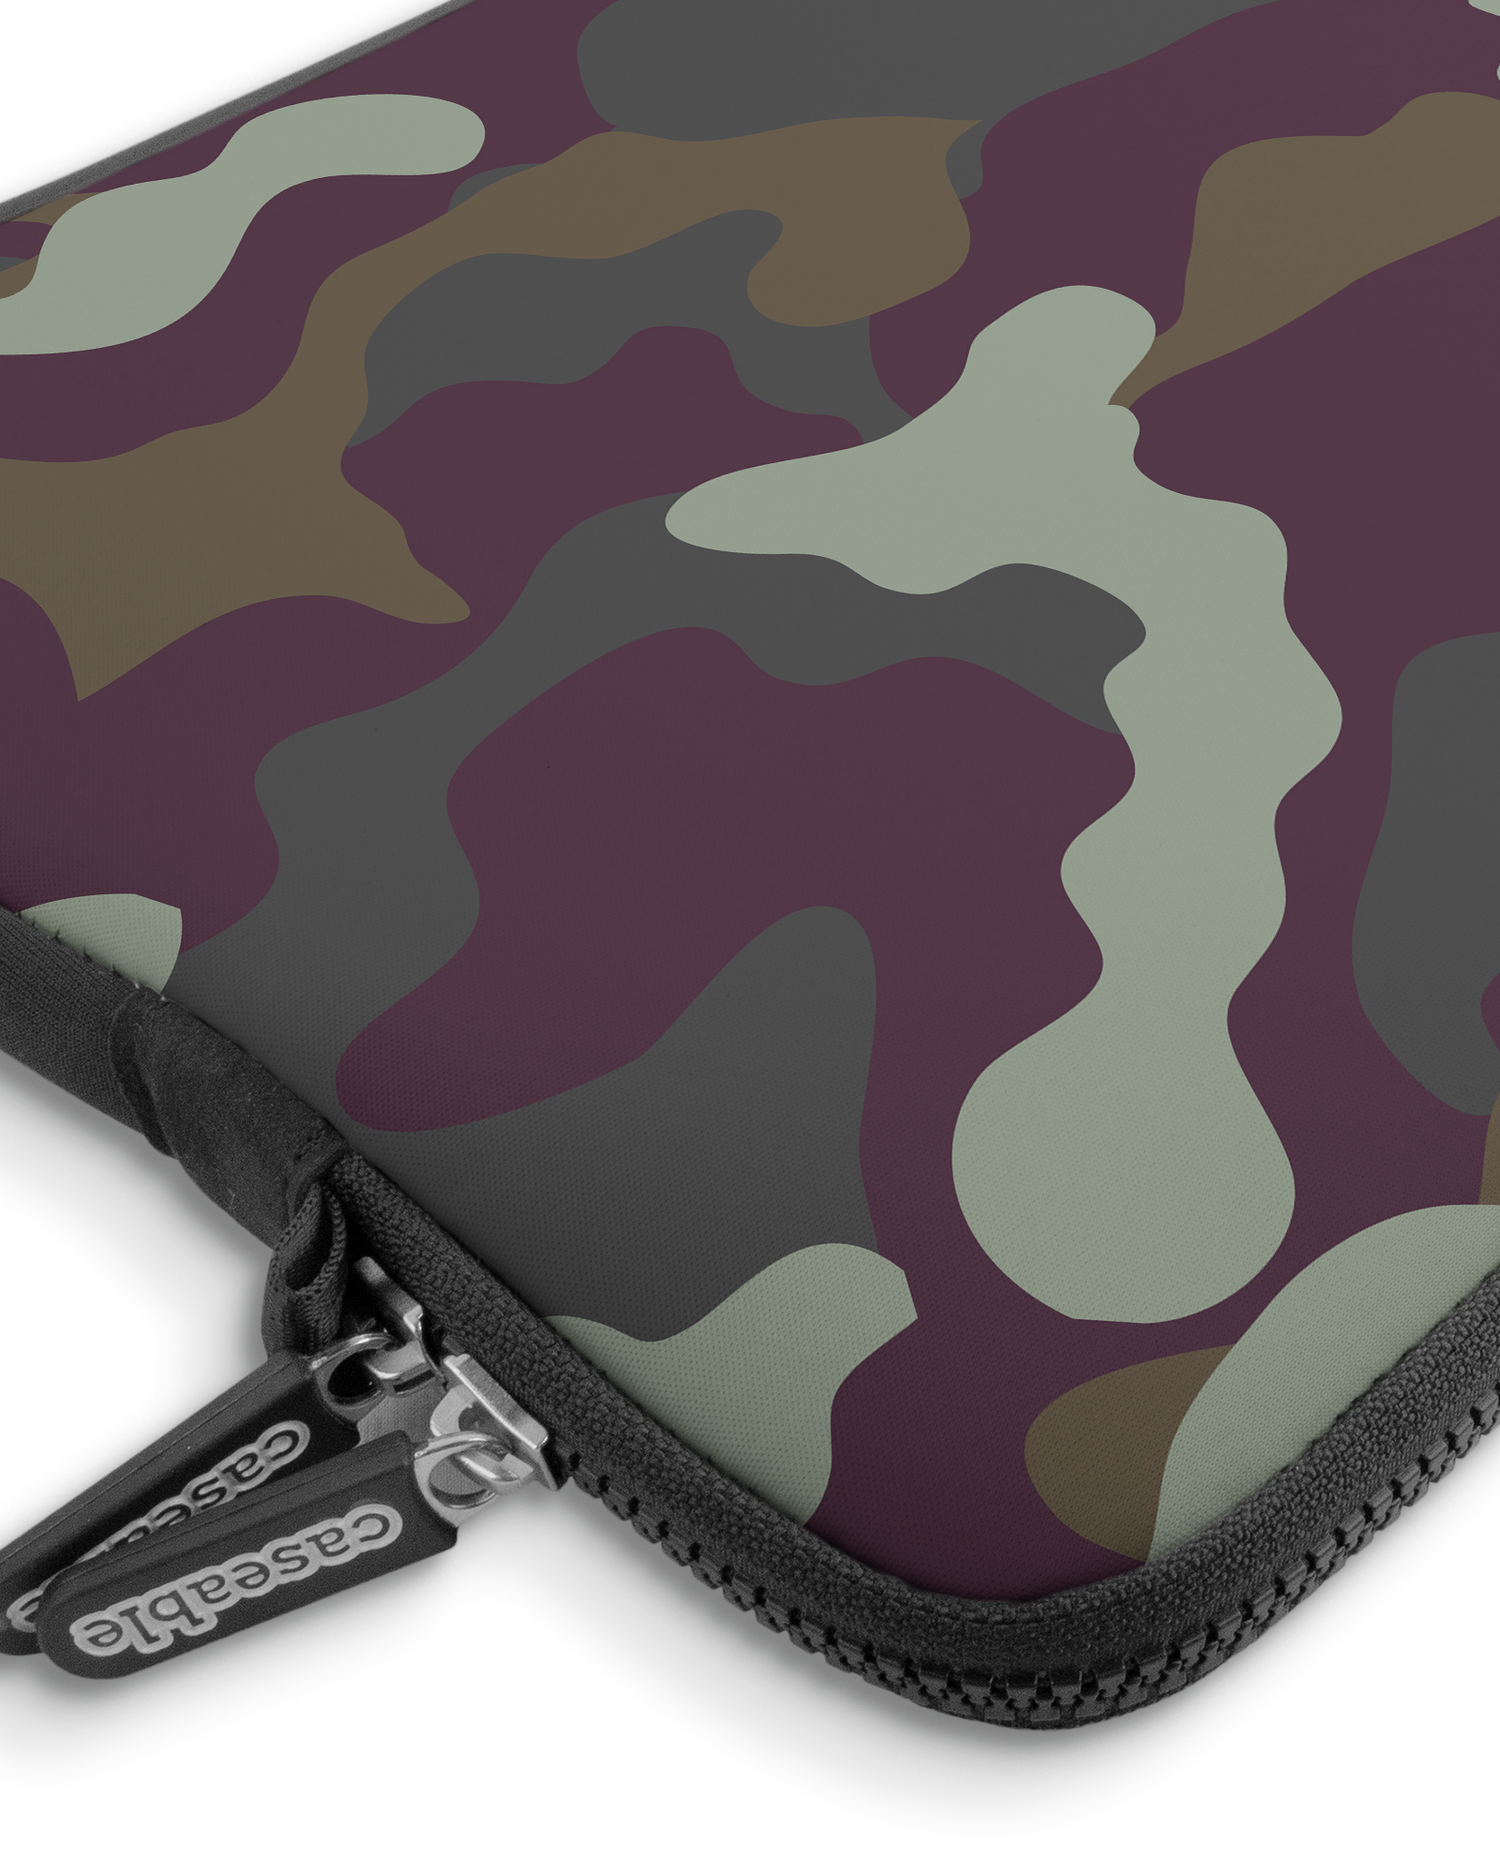 Night Camo Premium Laptop Bag 13-14 inch with device inside